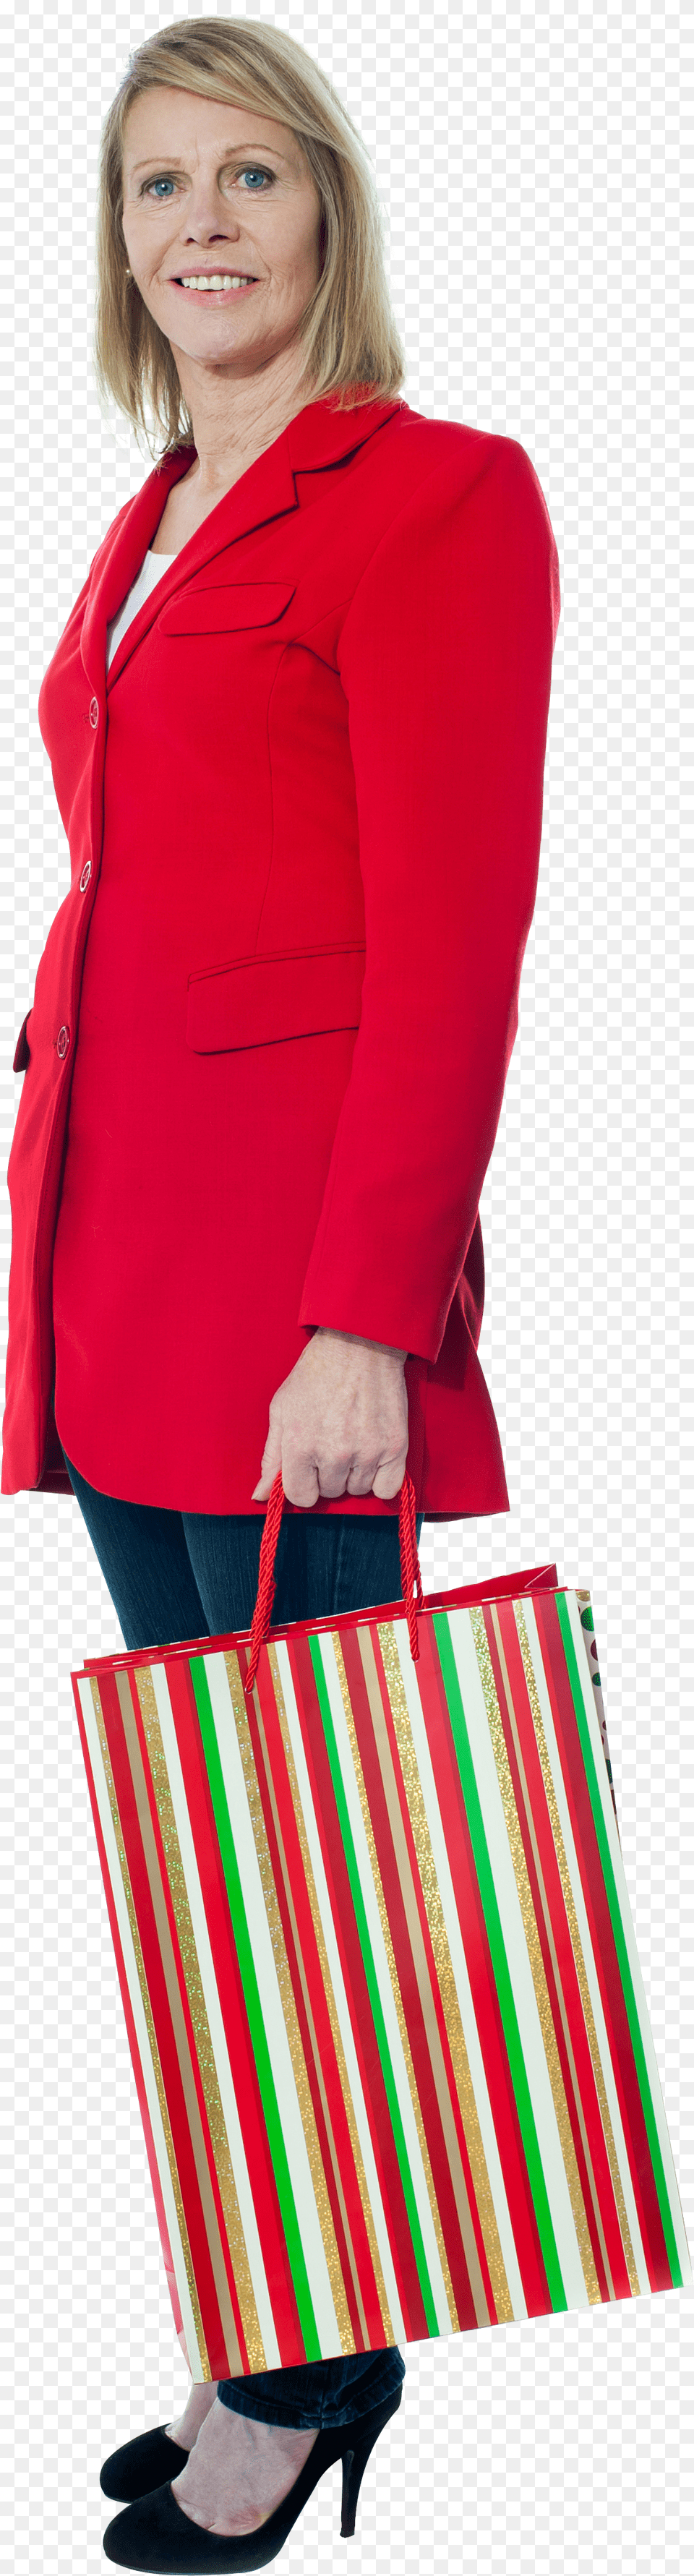 Shopping Womens With Bag Free Png